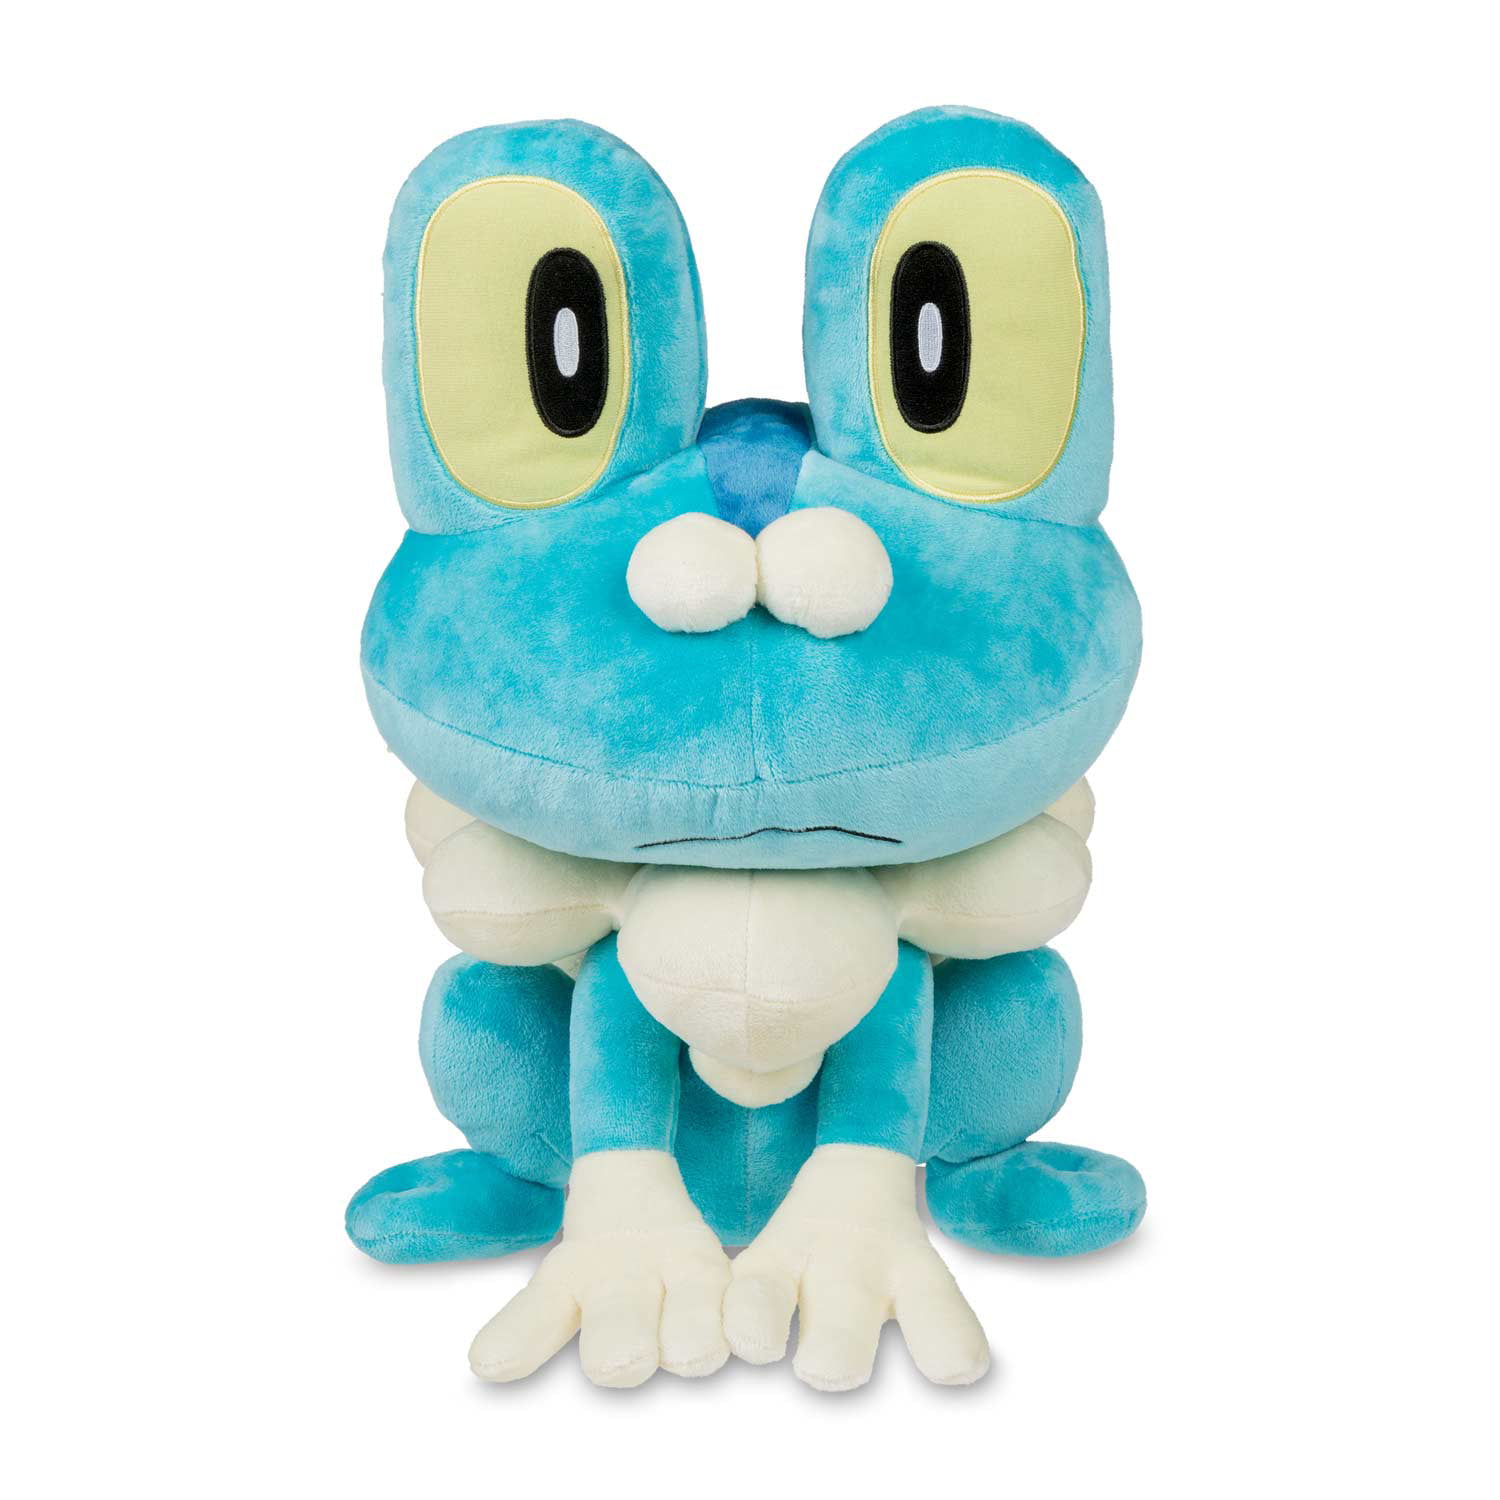 Froakie Frog Soft Plush Cuddly Doll Stuffed Toy Kids Xmas Collectible Gift 7"